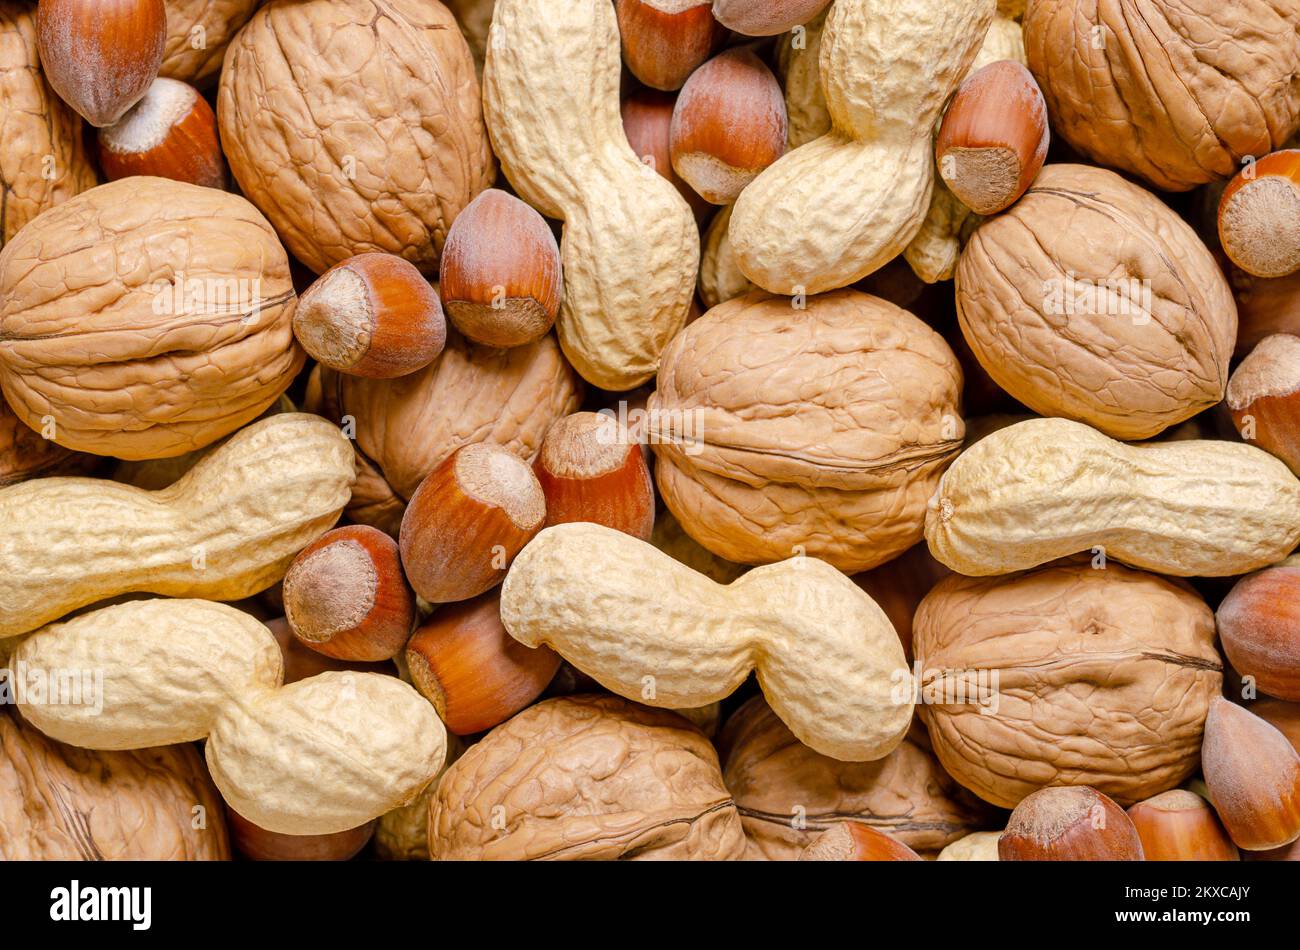 Mixed nuts in their shells, snack nuts, background. Unshelled hazelnuts, peanuts and walnuts, dried and ready to eat. Stock Photo